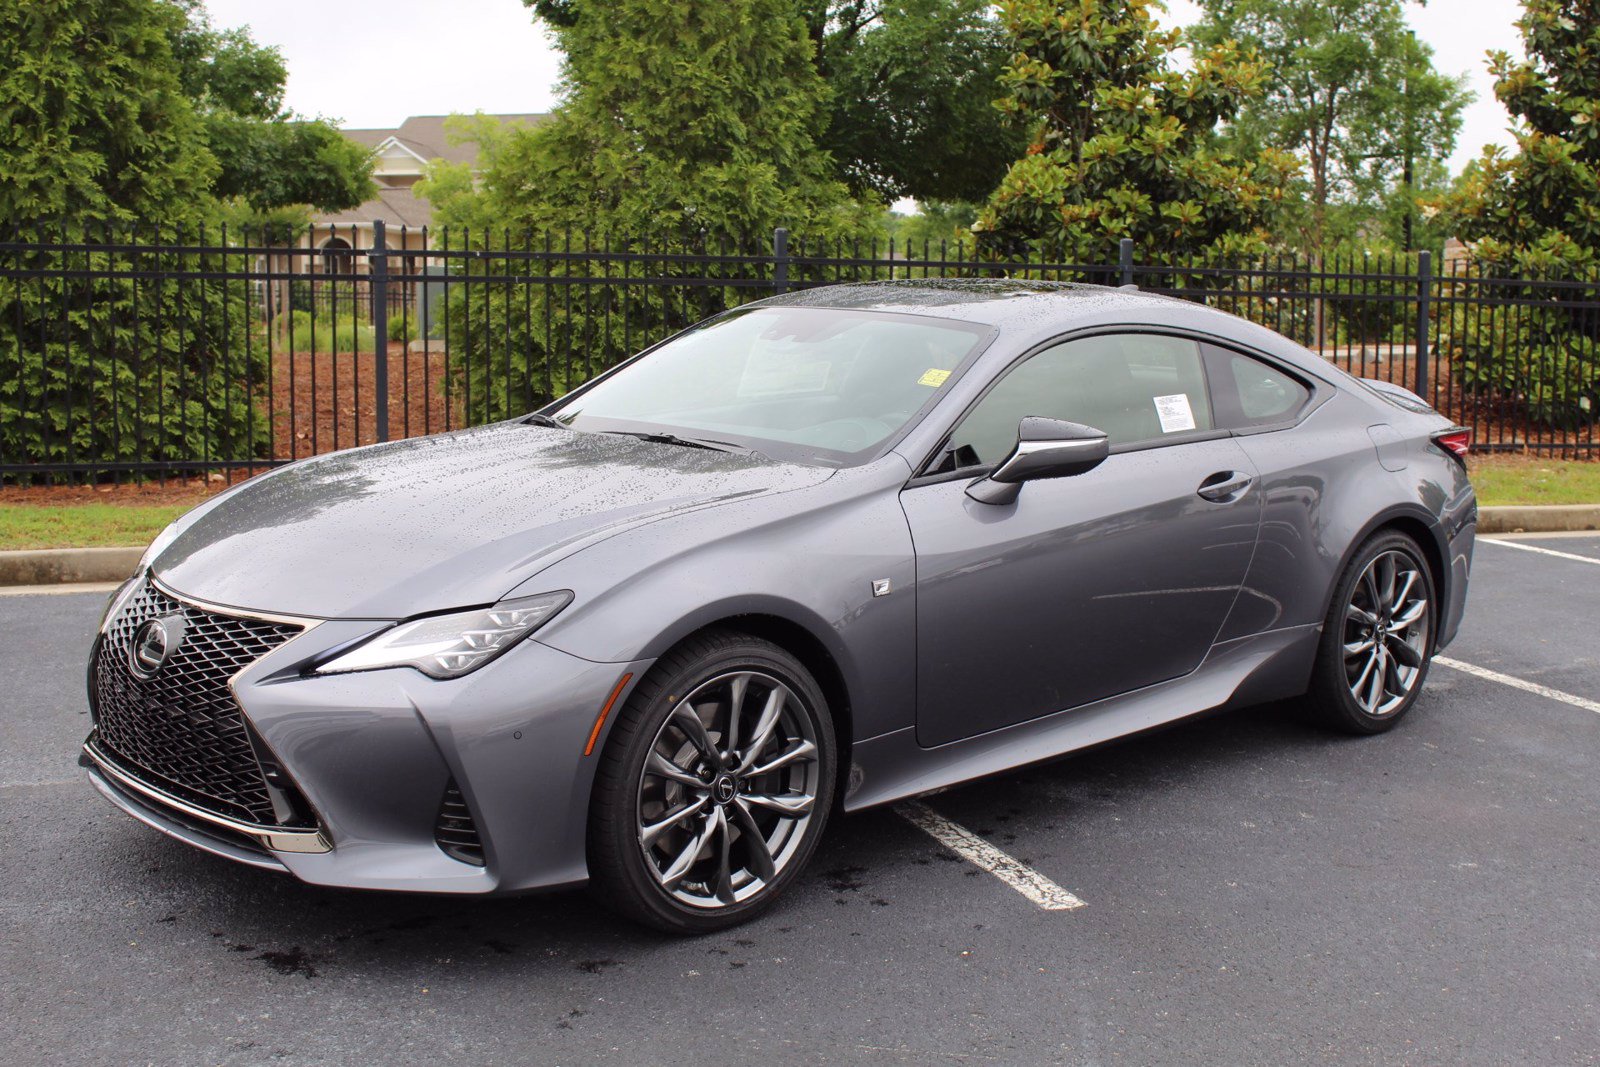 28 HQ Images Rc F Sport Price / ClubLexus First Drive: The 2015 RC F and RC 350 F Sport ...